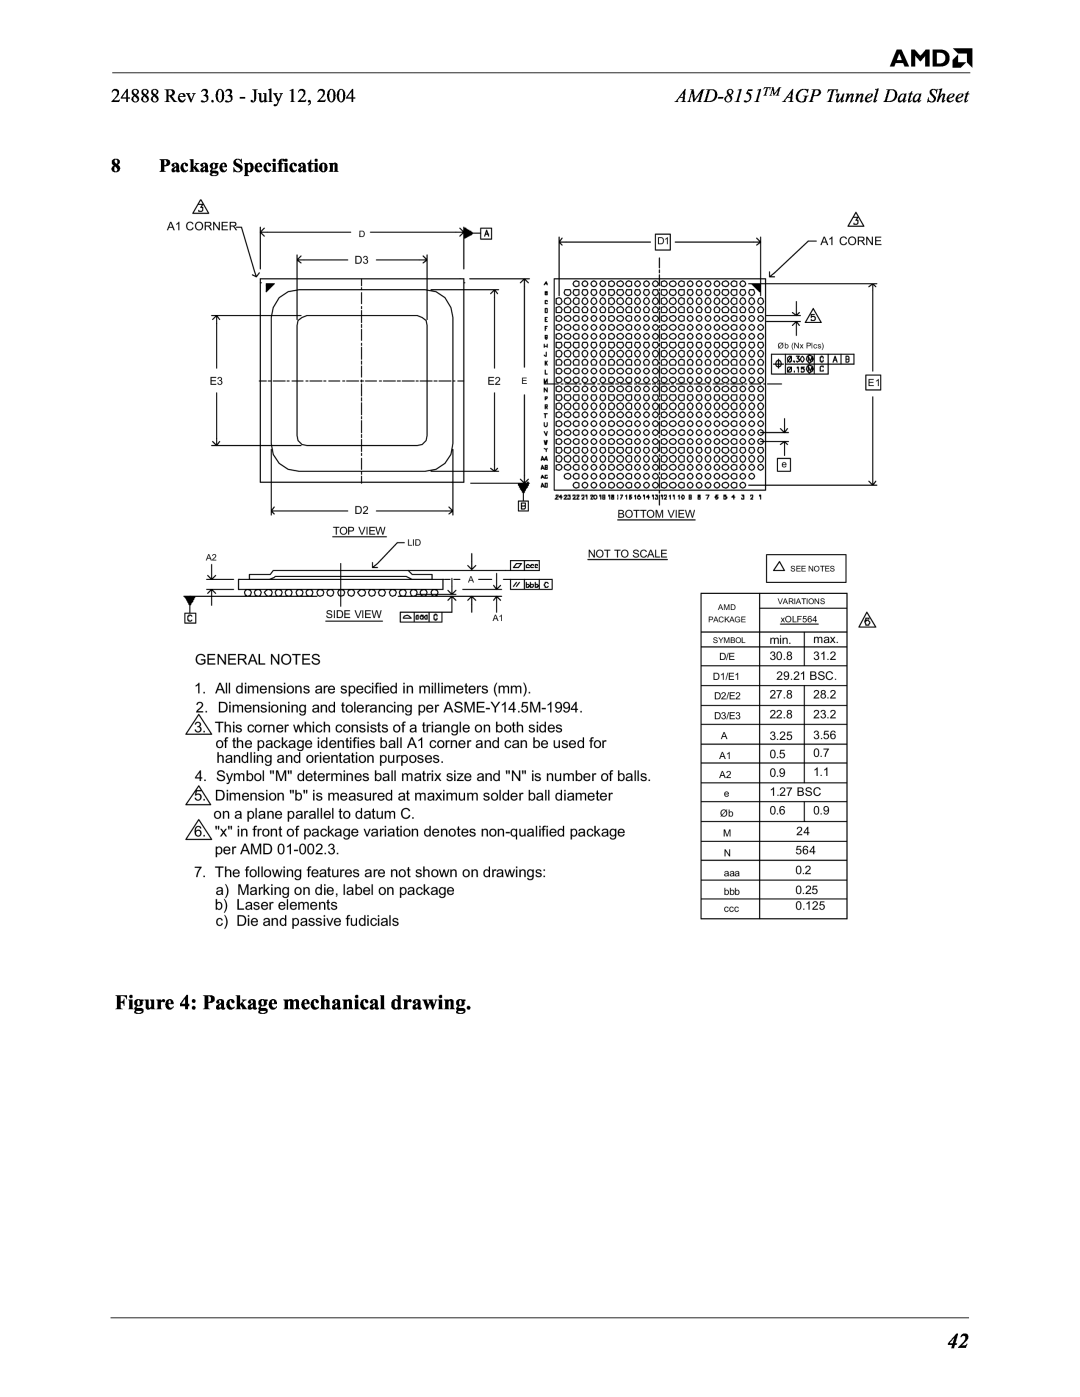 AMD specifications Package mechanical drawing, Rev 3.03 - July, 8Package Specification, AMD-8151TM AGP Tunnel Data Sheet 